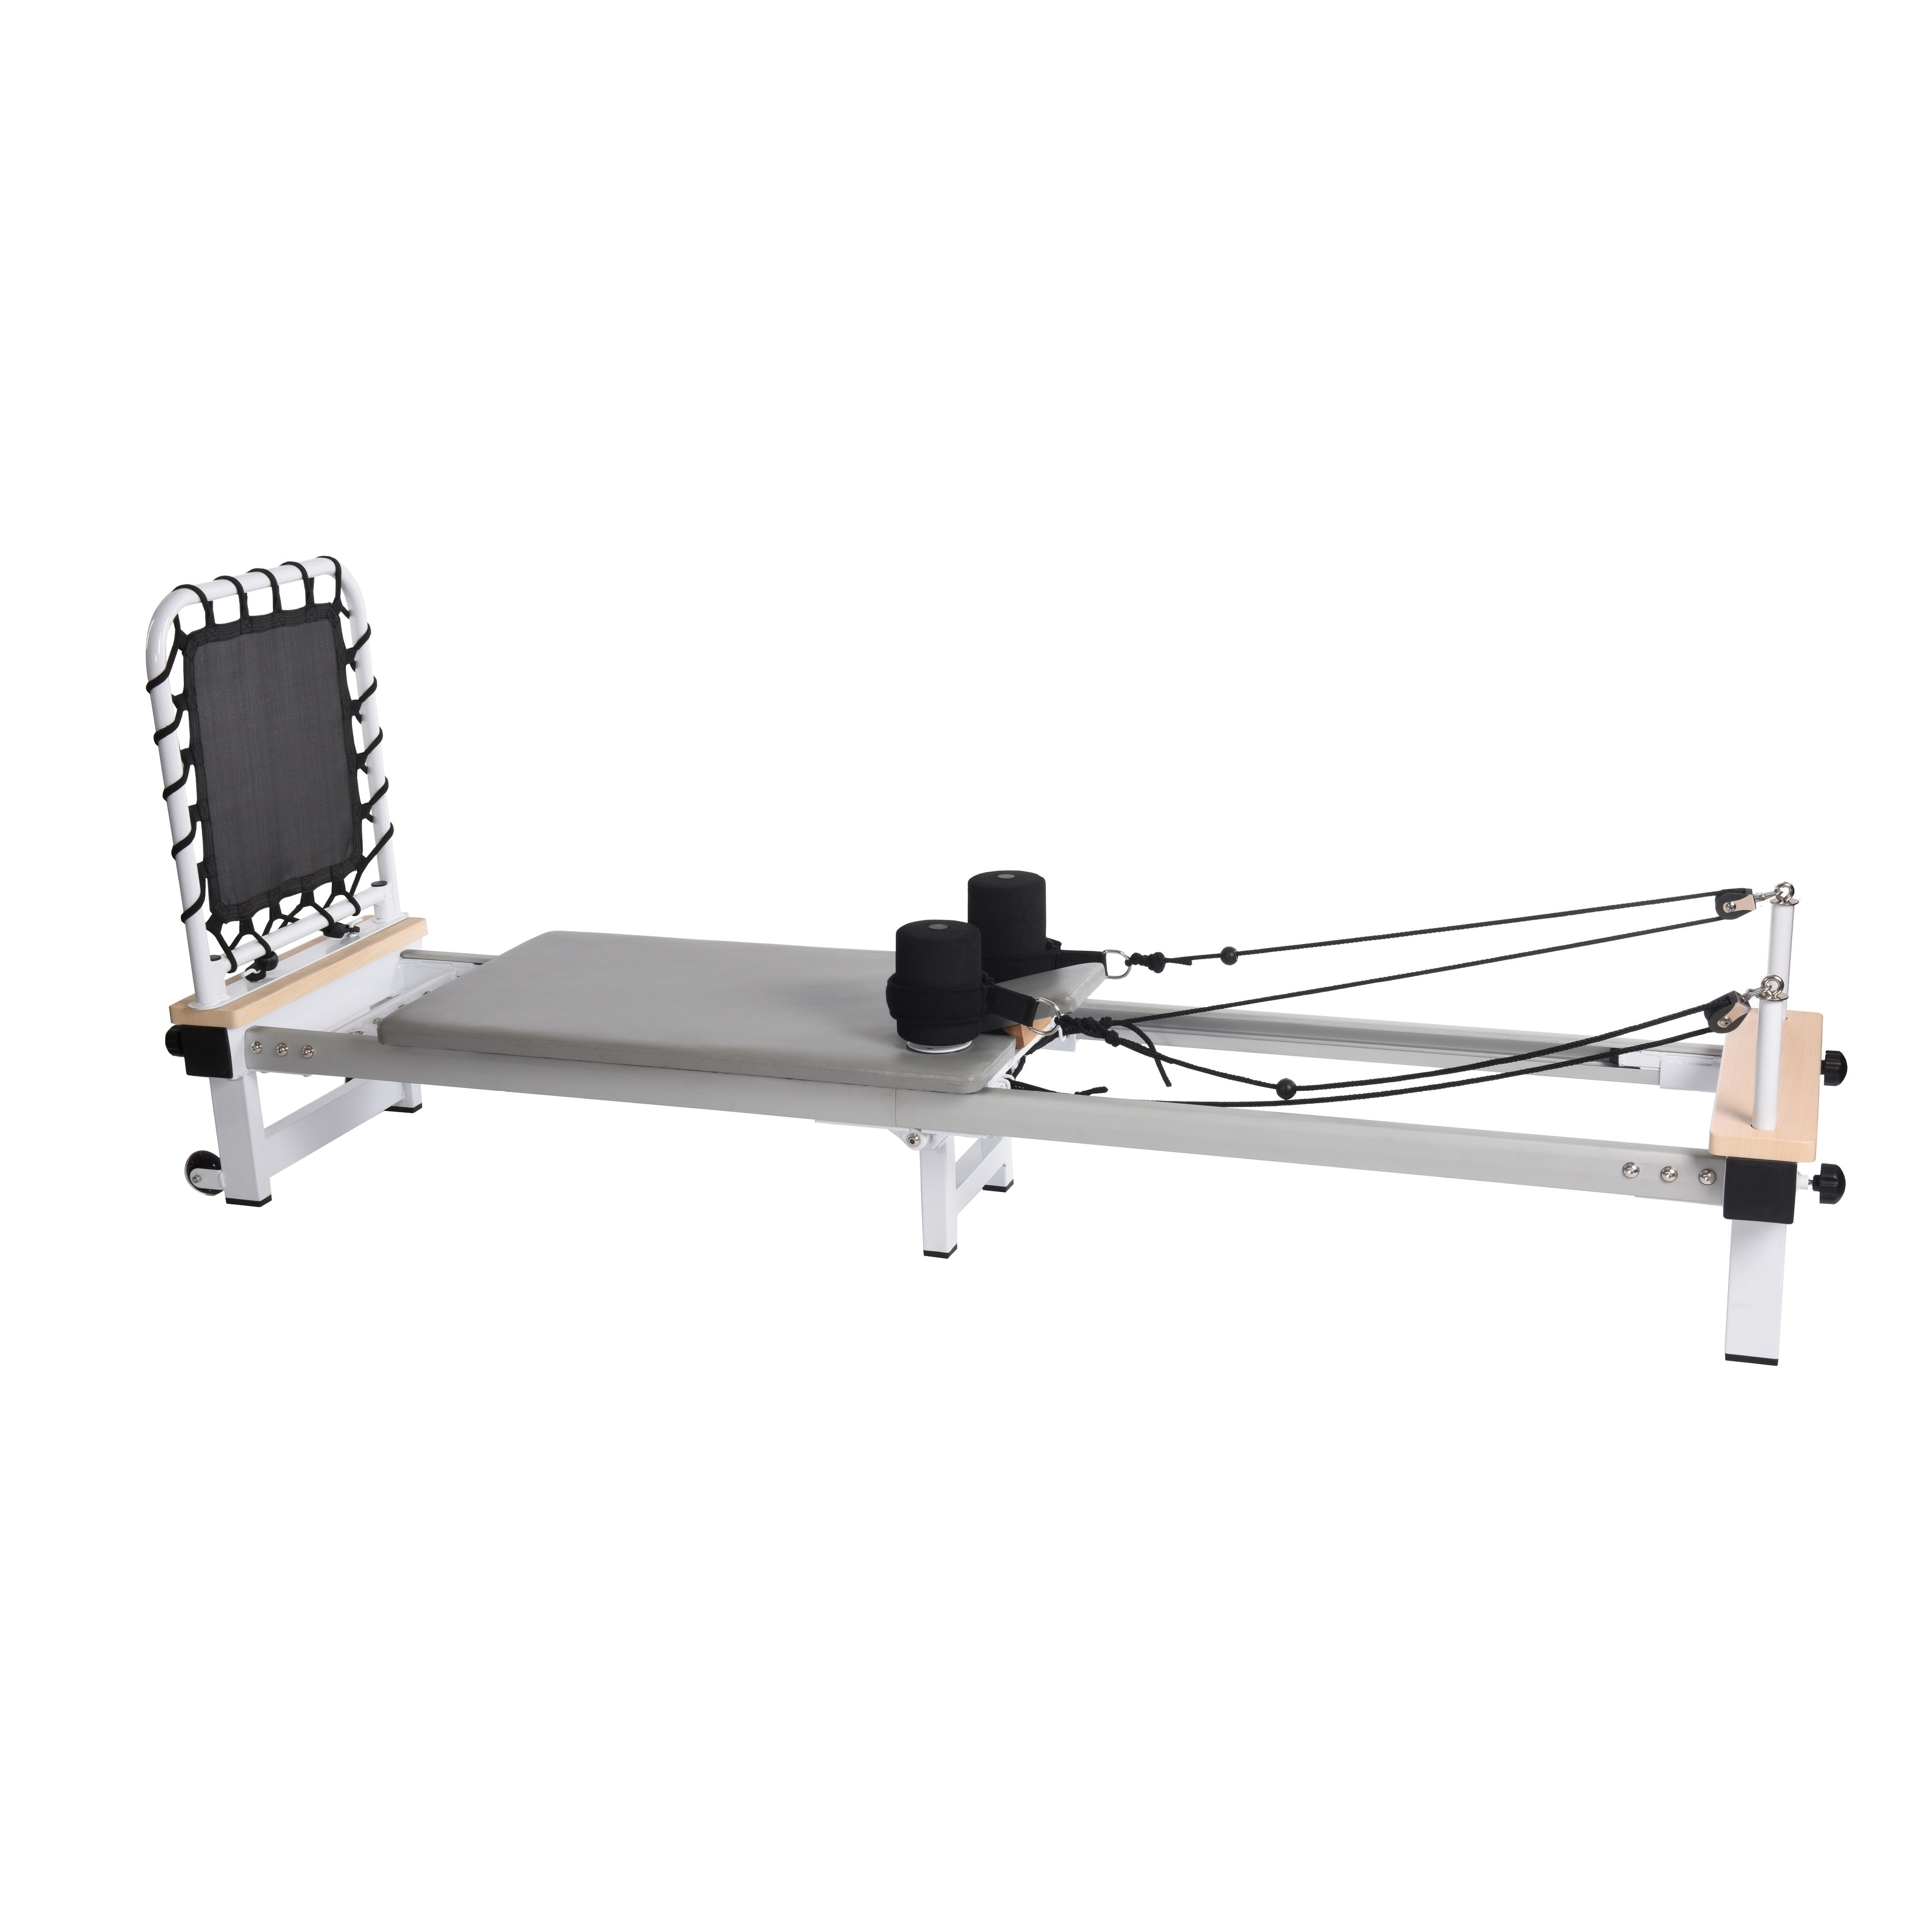 https://ak1.ostkcdn.com/images/products/22096985/AeroPilates-Precision-Series-Reformer-610-with-Cardio-Rebounder-Grey-White-5d402a71-d228-4960-83ad-169d190283fd.jpg